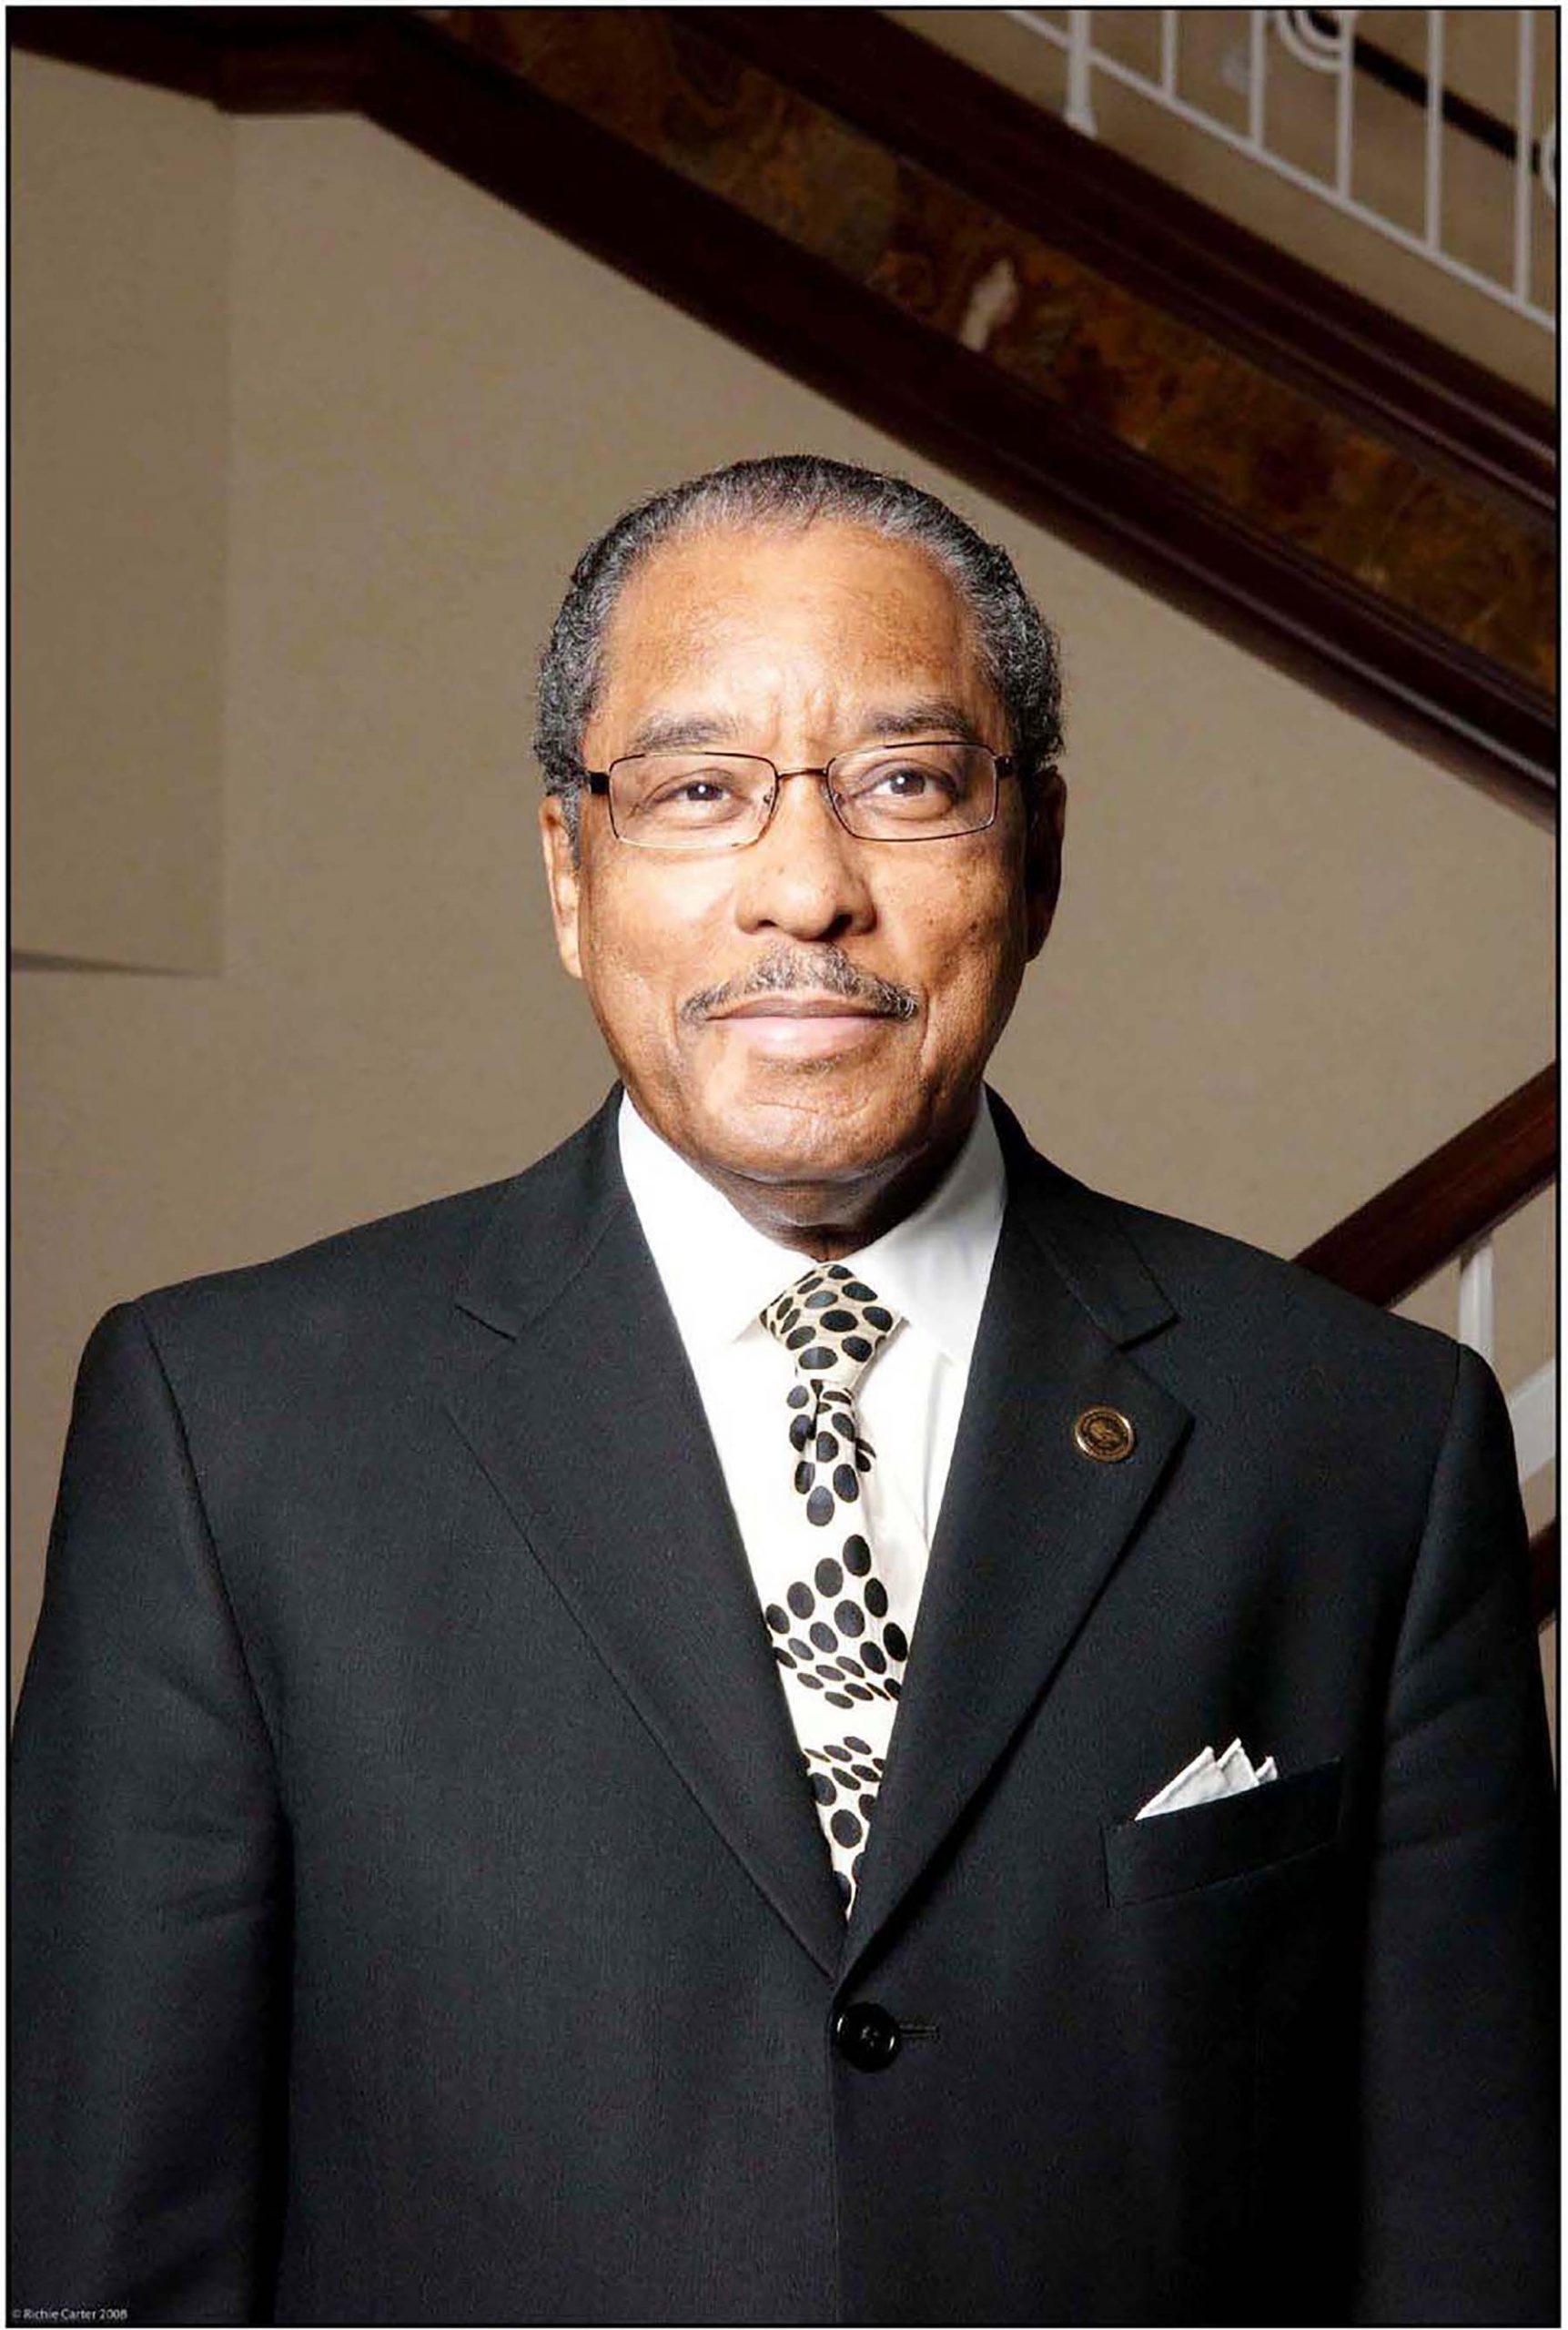 Statement from American Baptist College on the Life & Legacy of Rev. Dr. Julius Scruggs